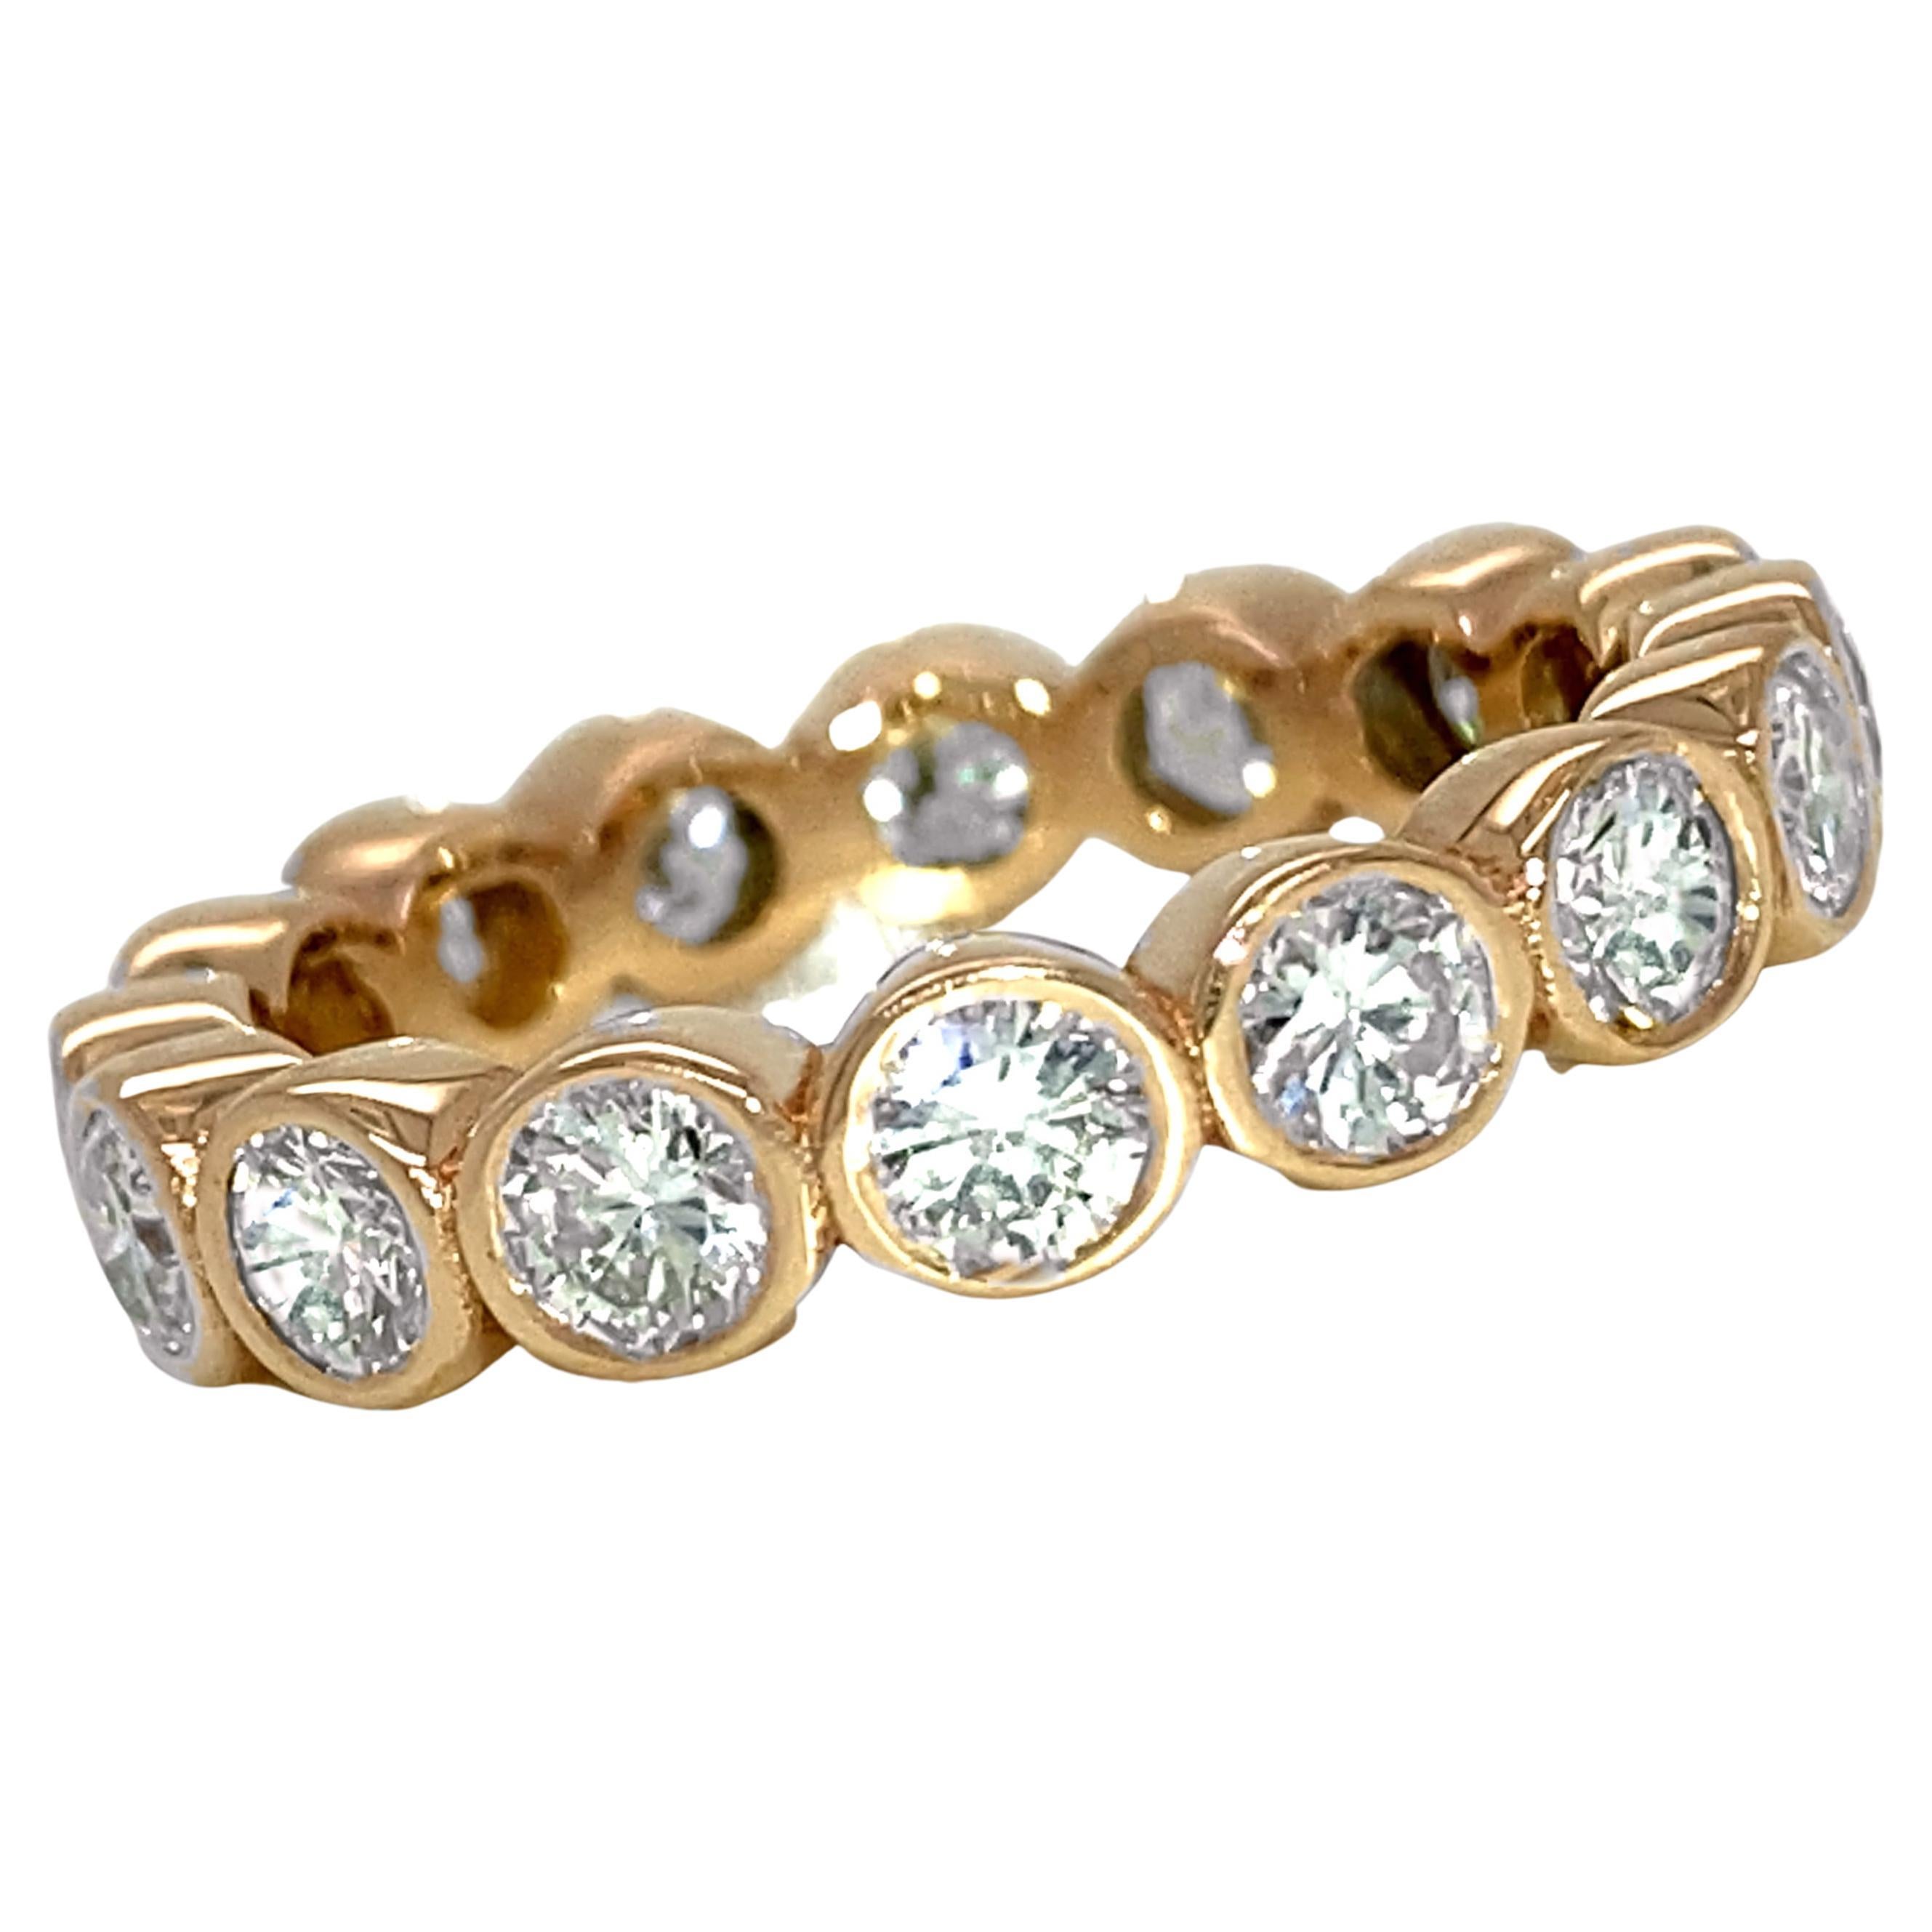 1.6 Carat Diamond Eternity Band with Open Bezels in Rose Gold